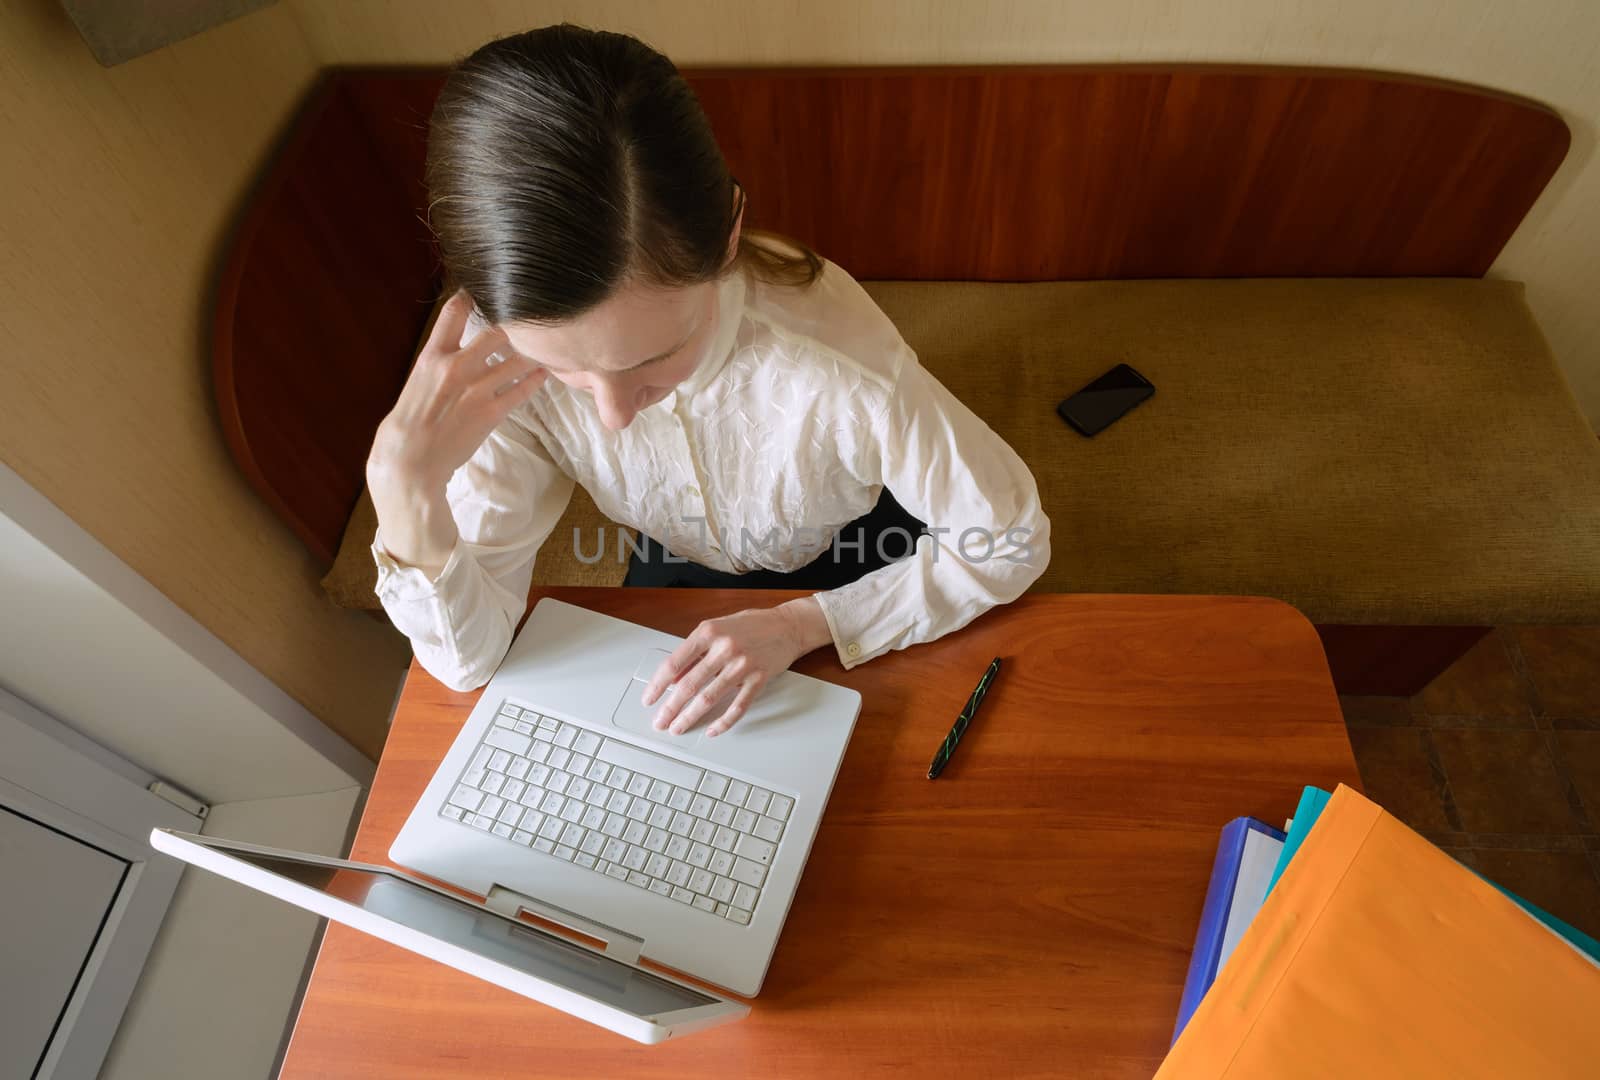 An elegant business woman is using a laptop computer. She is satisfied of her work.